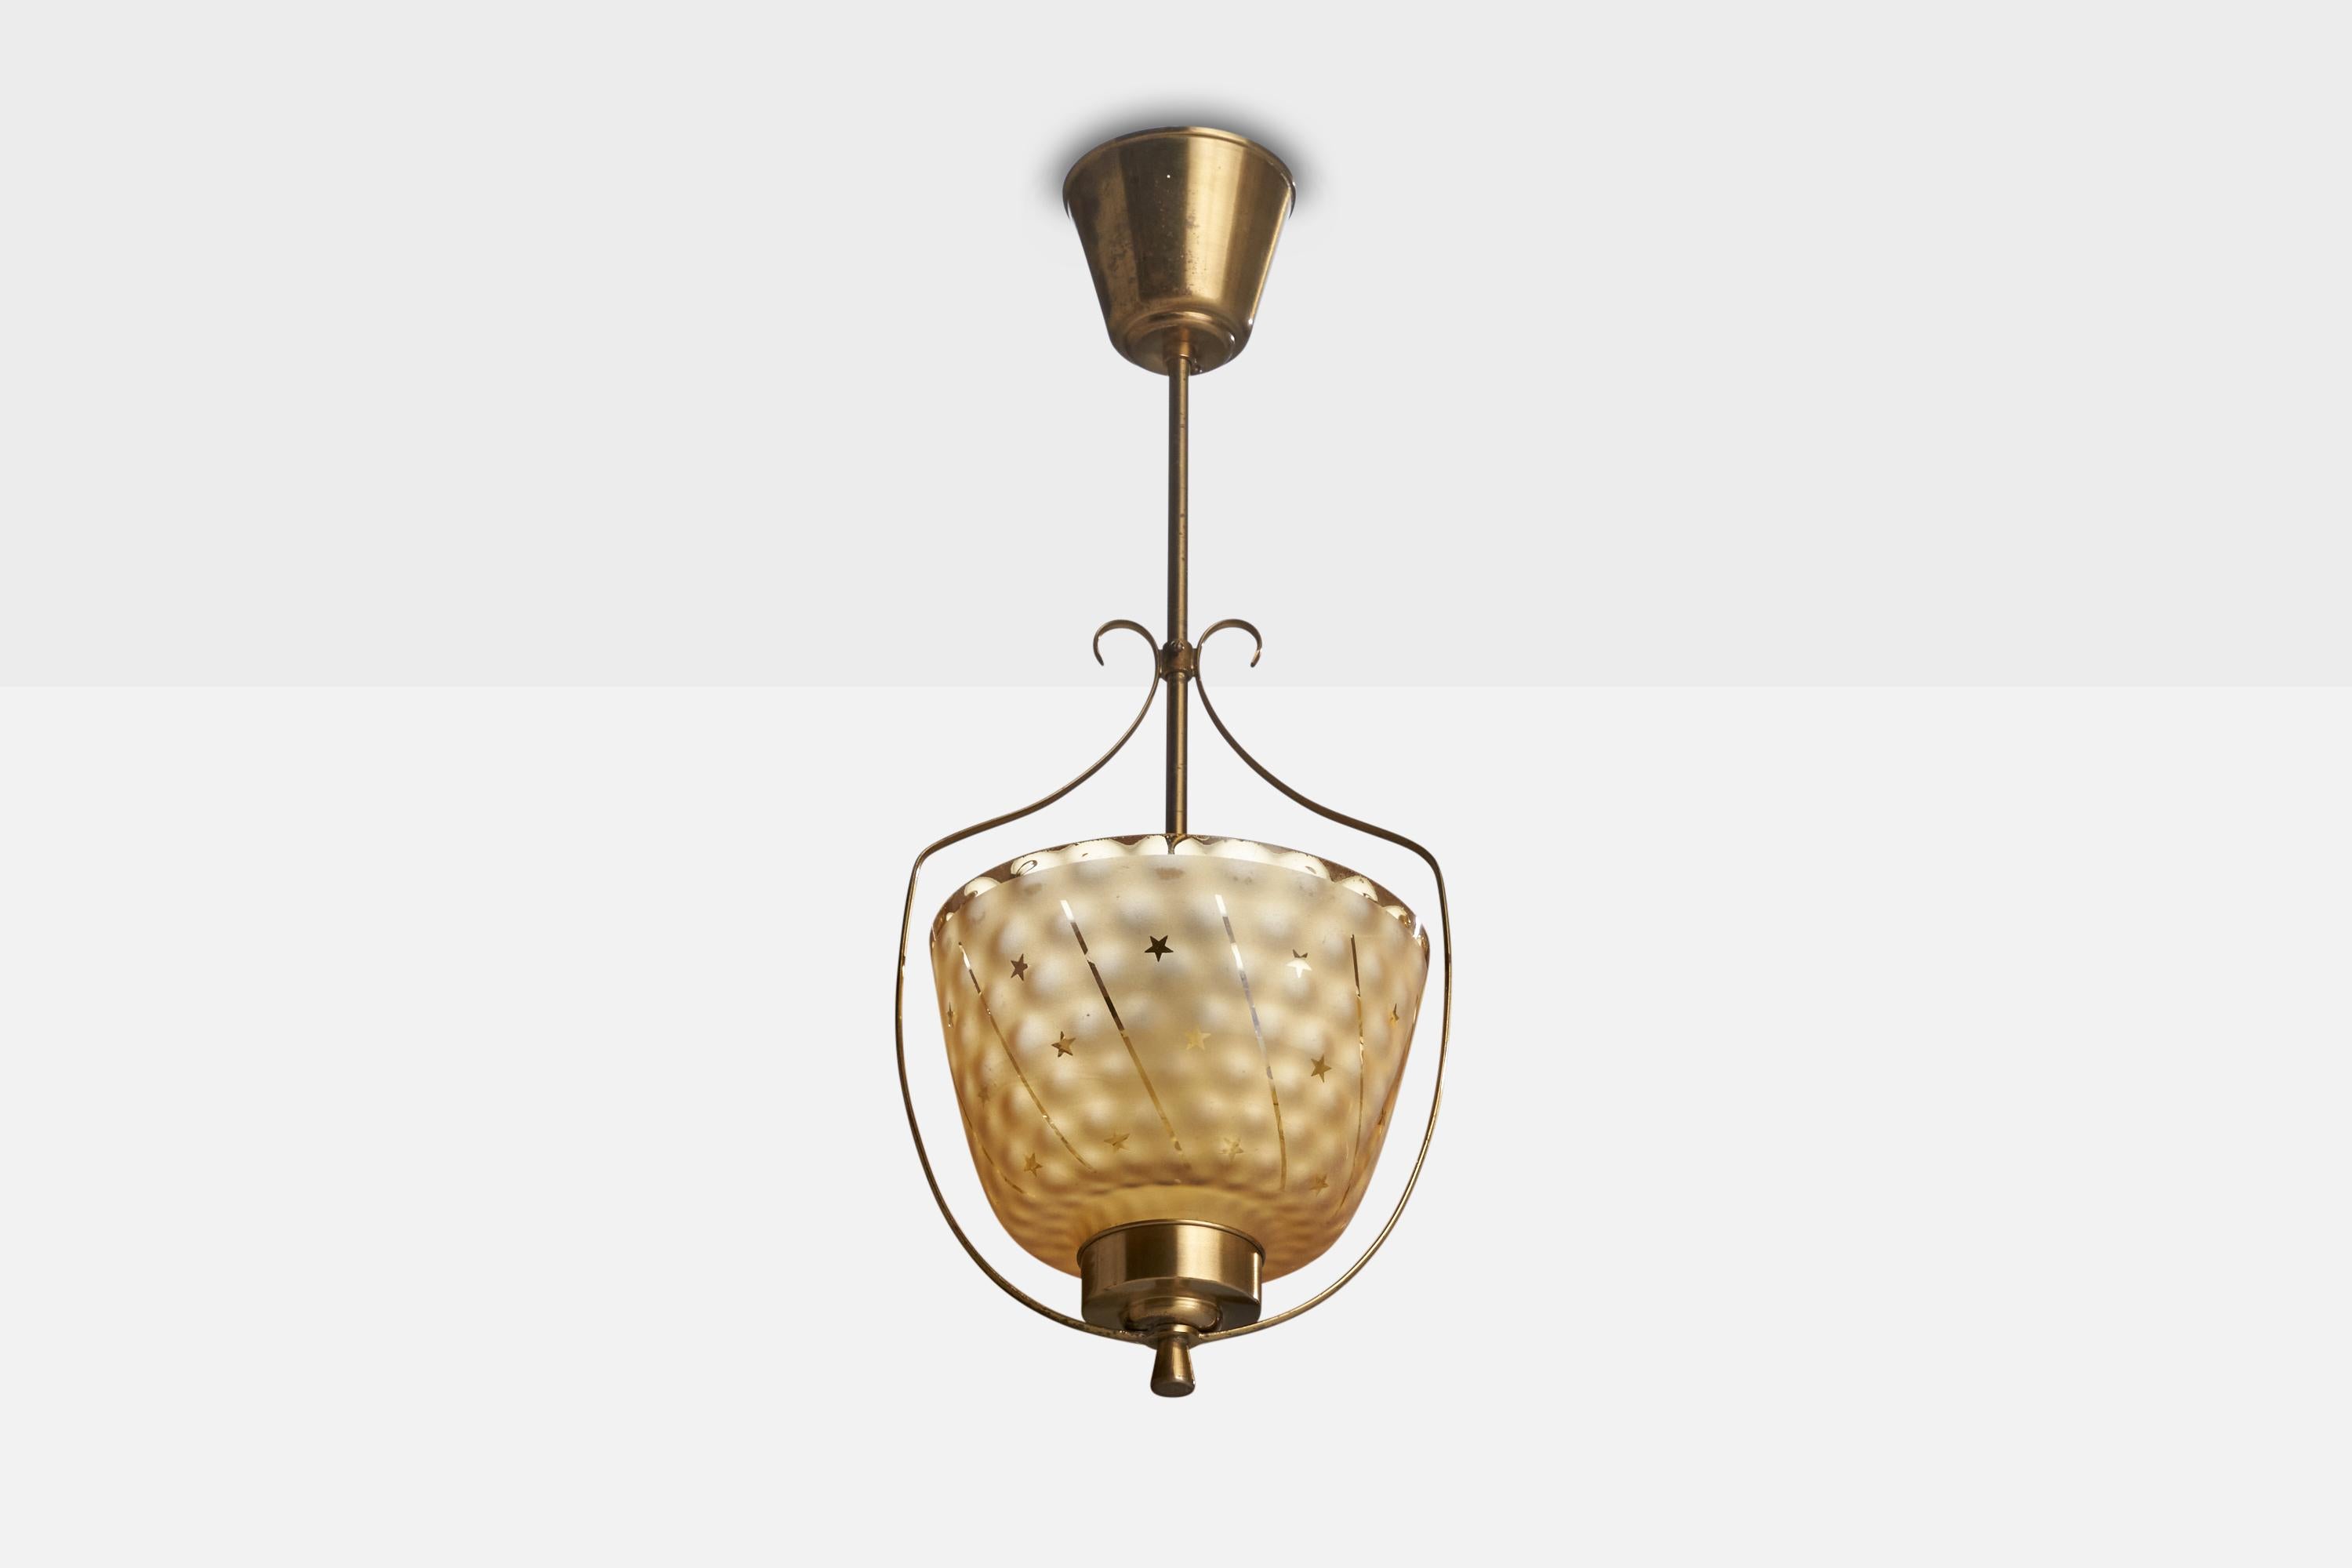 A brass and yellow etched glass pendant designed and produced in Sweden, c. 1940s.

Dimensions of canopy (inches): 3.46” H x 3.92” Diameter
Socket takes standard E-26 bulbs. 1 socket.There is no maximum wattage stated on the fixture. All lighting